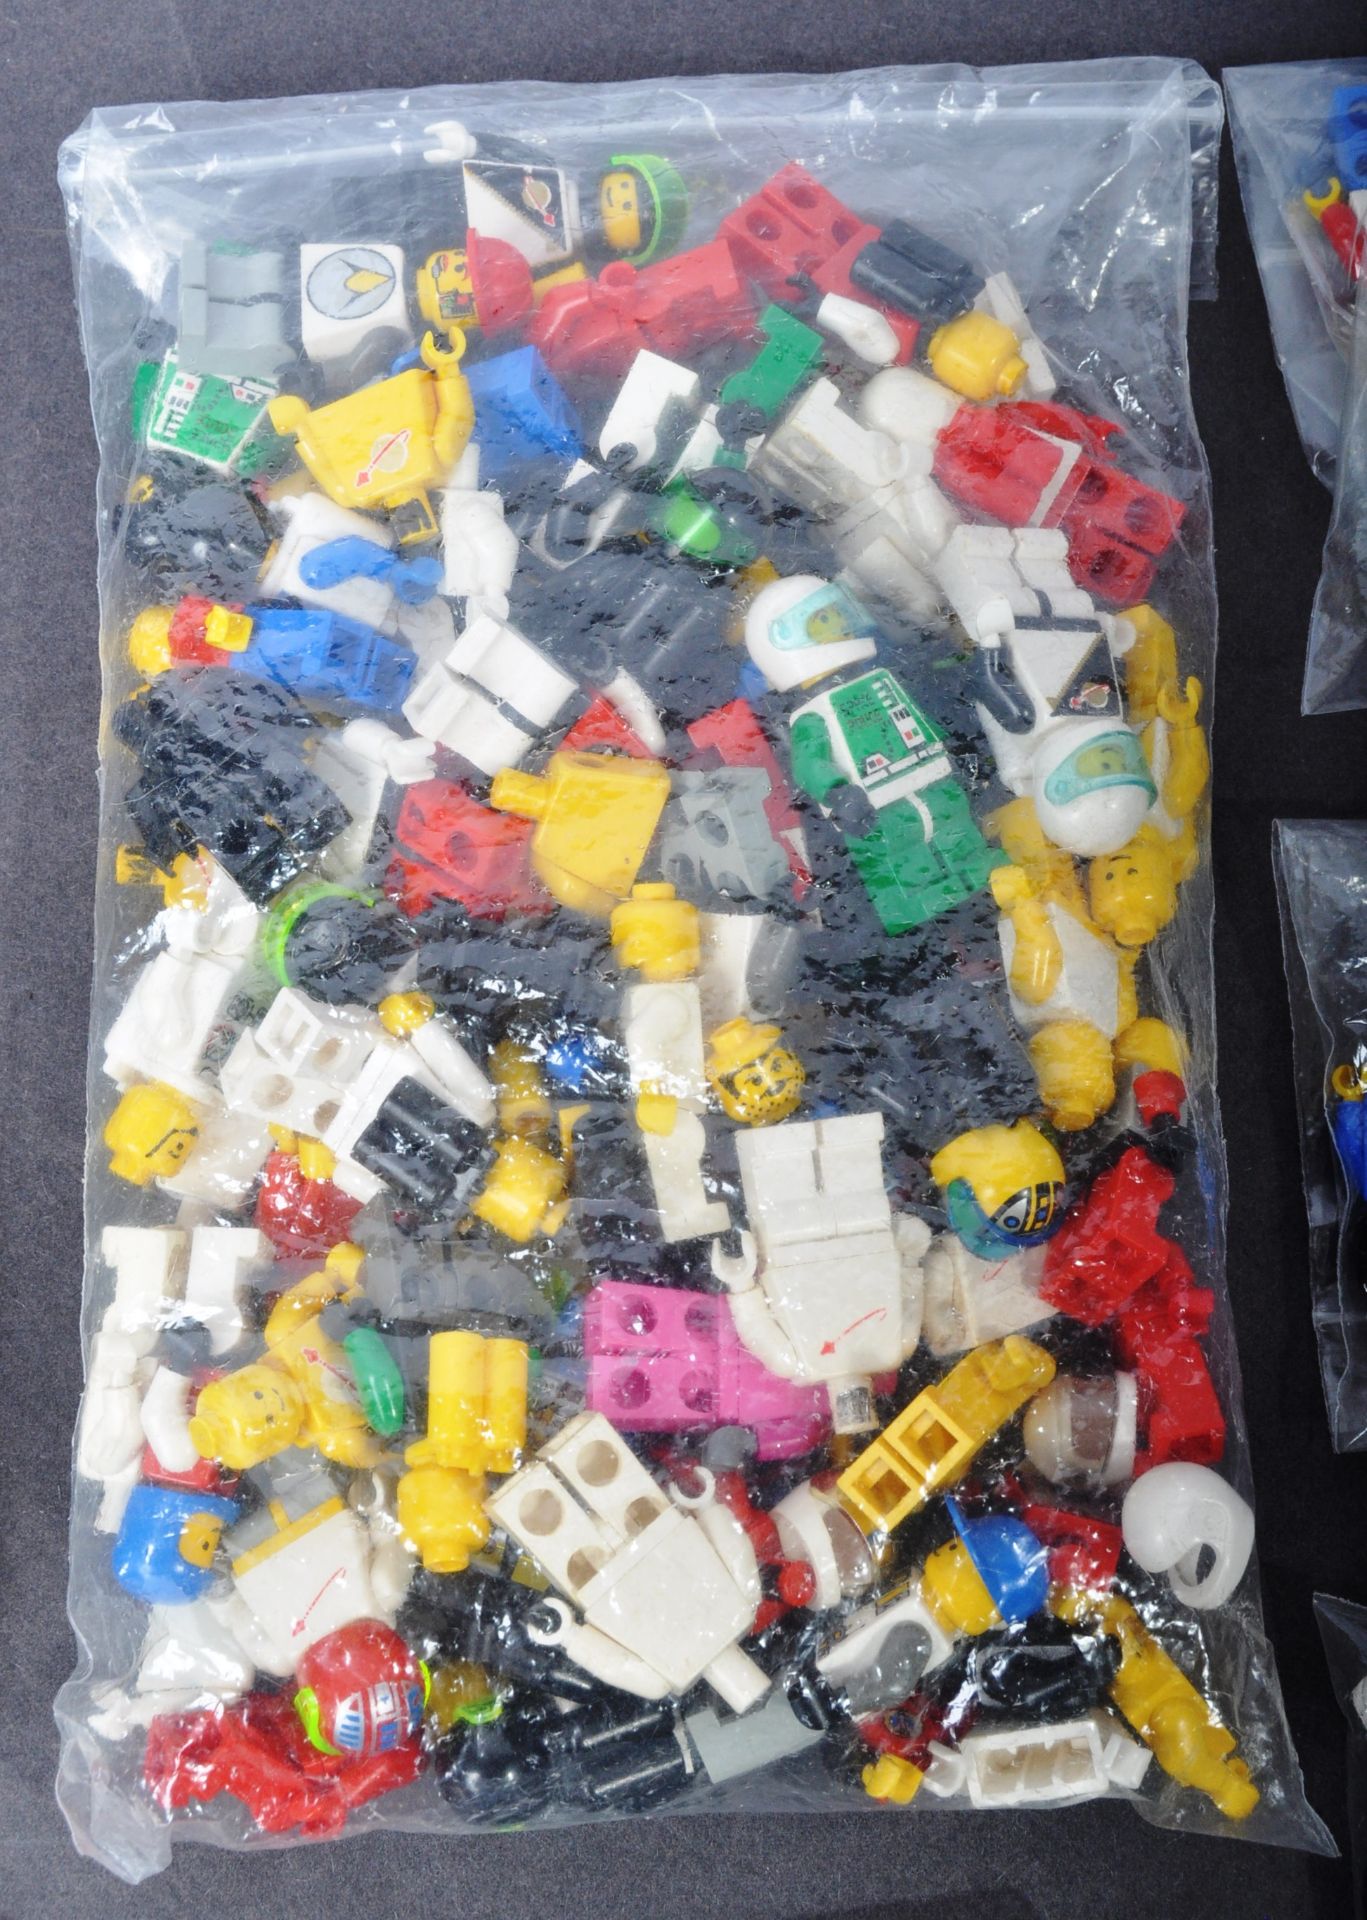 LEGO MINIFIGURES - COLLECTION OF ASSORTED VINTAGE MINIFIGURES - Image 3 of 7